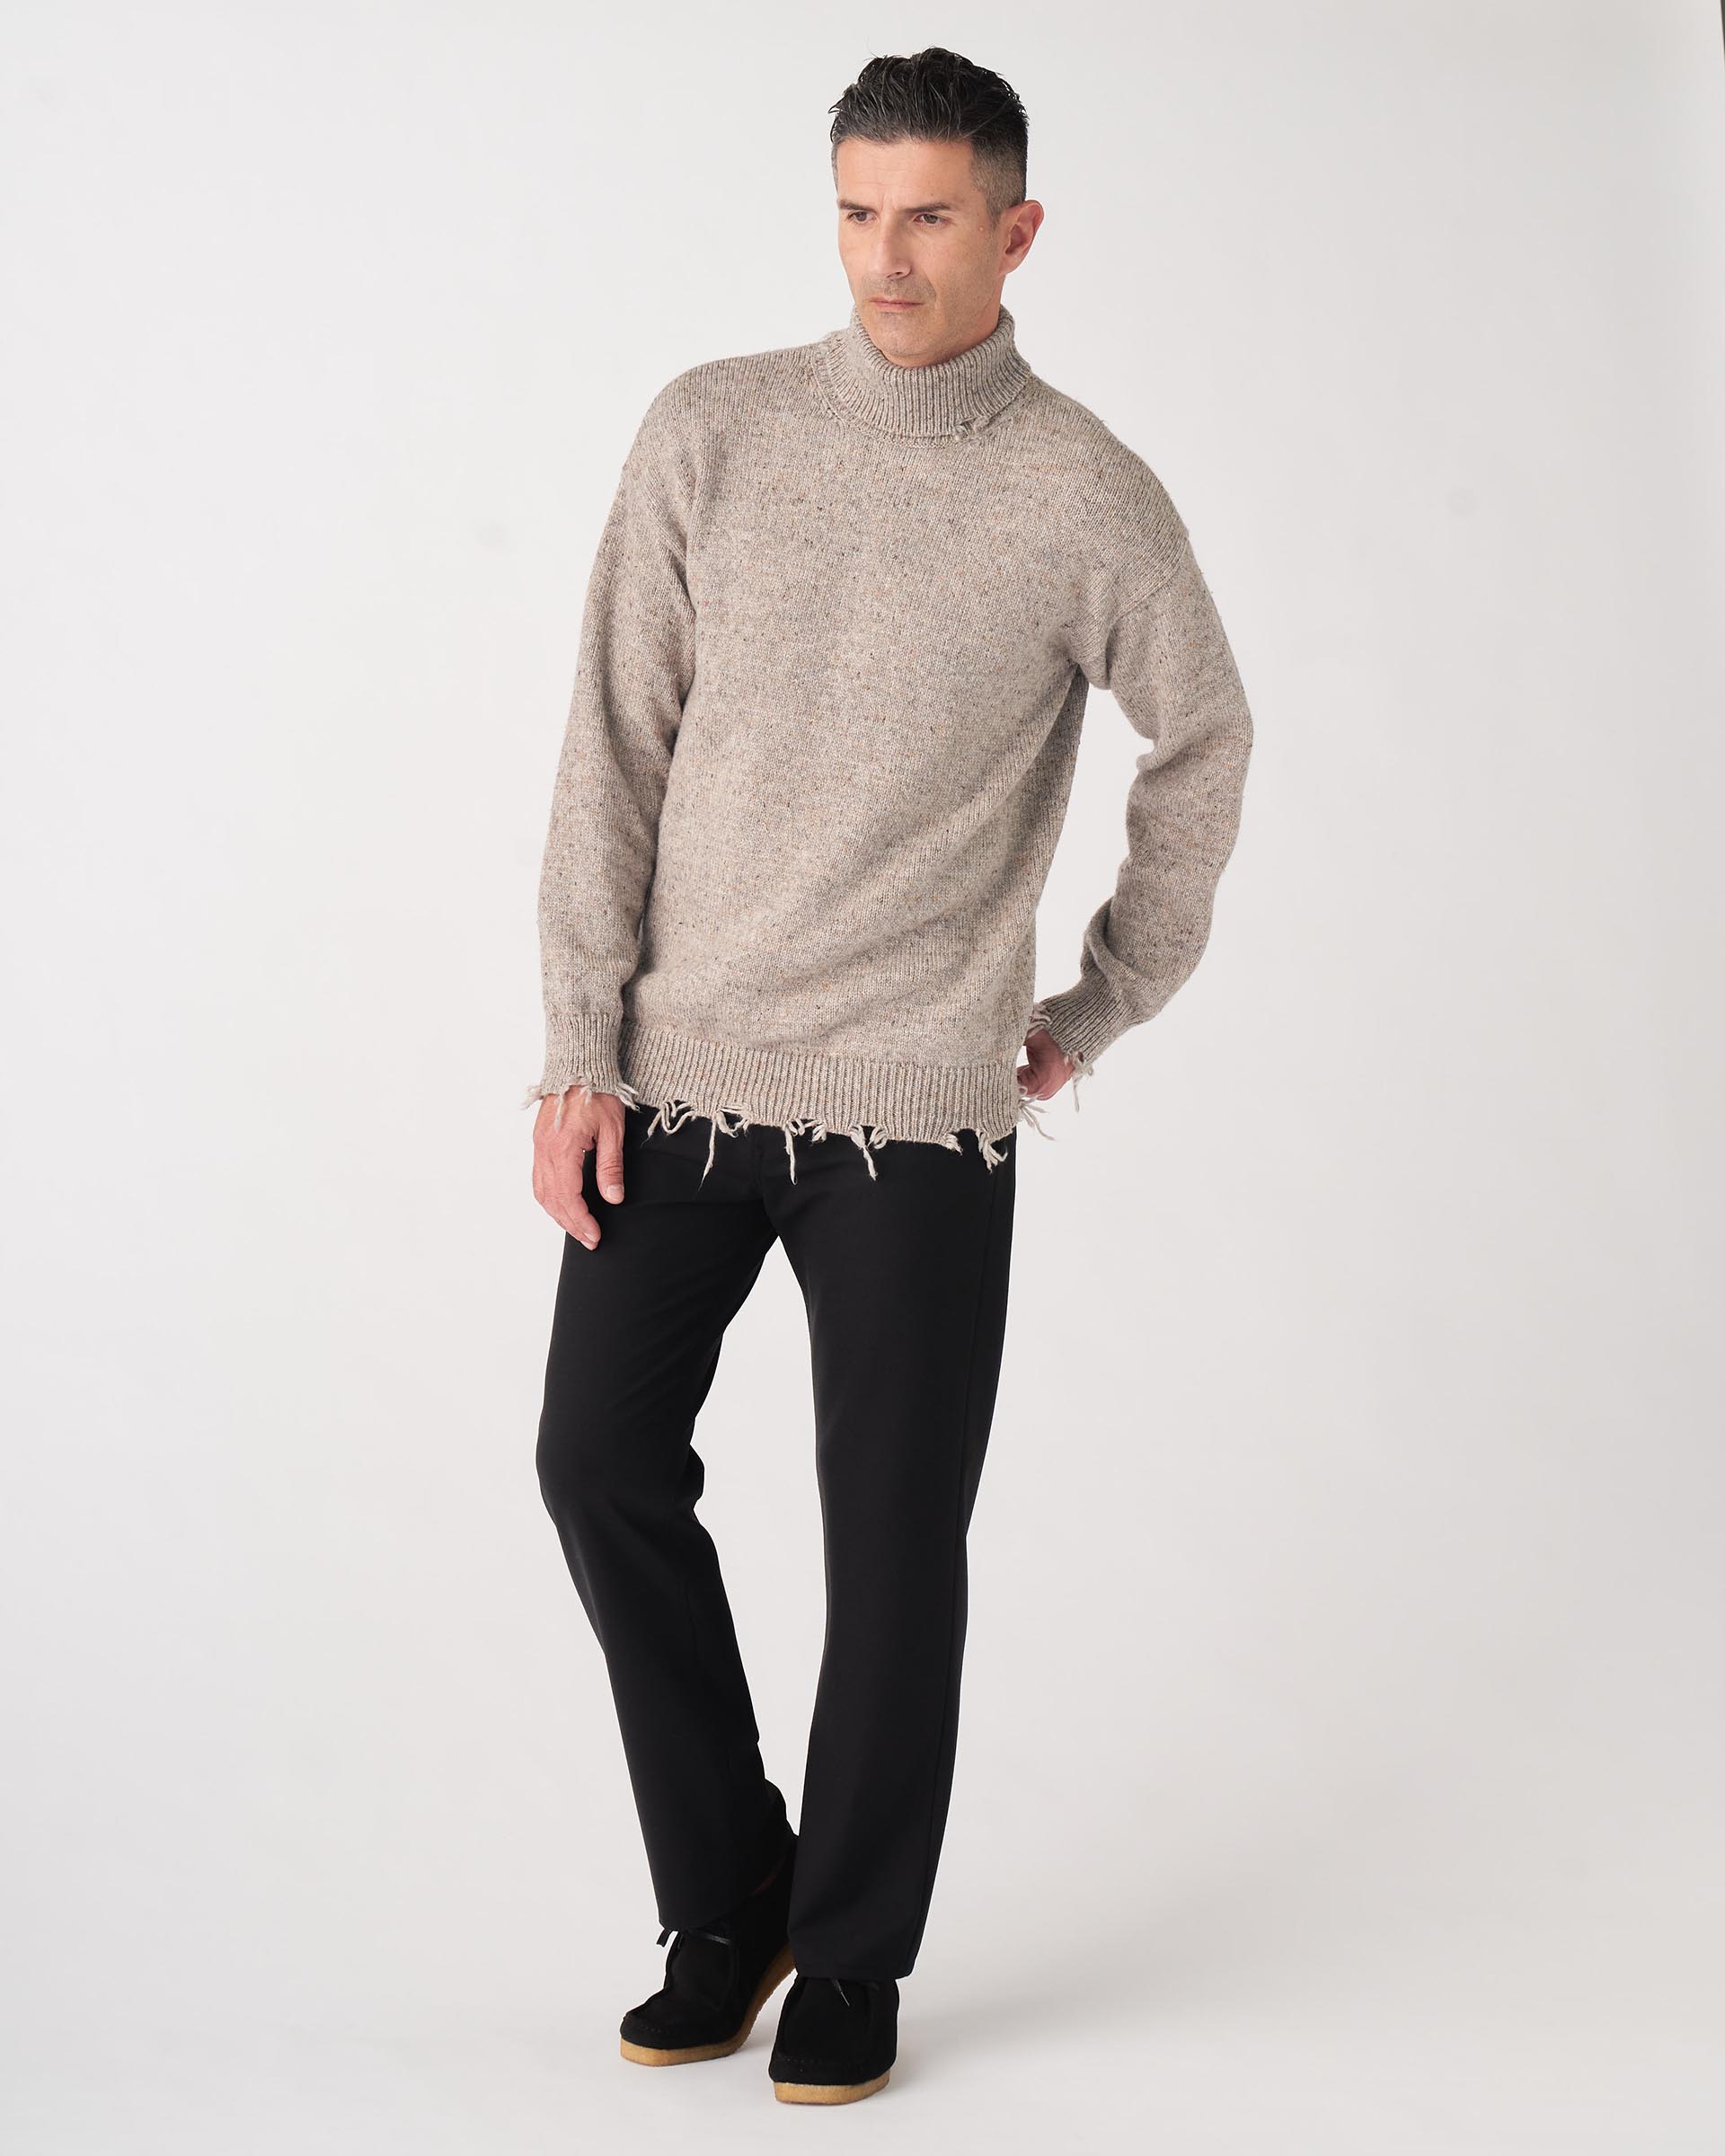 The Market Store | High Neck Sweater With Breaks